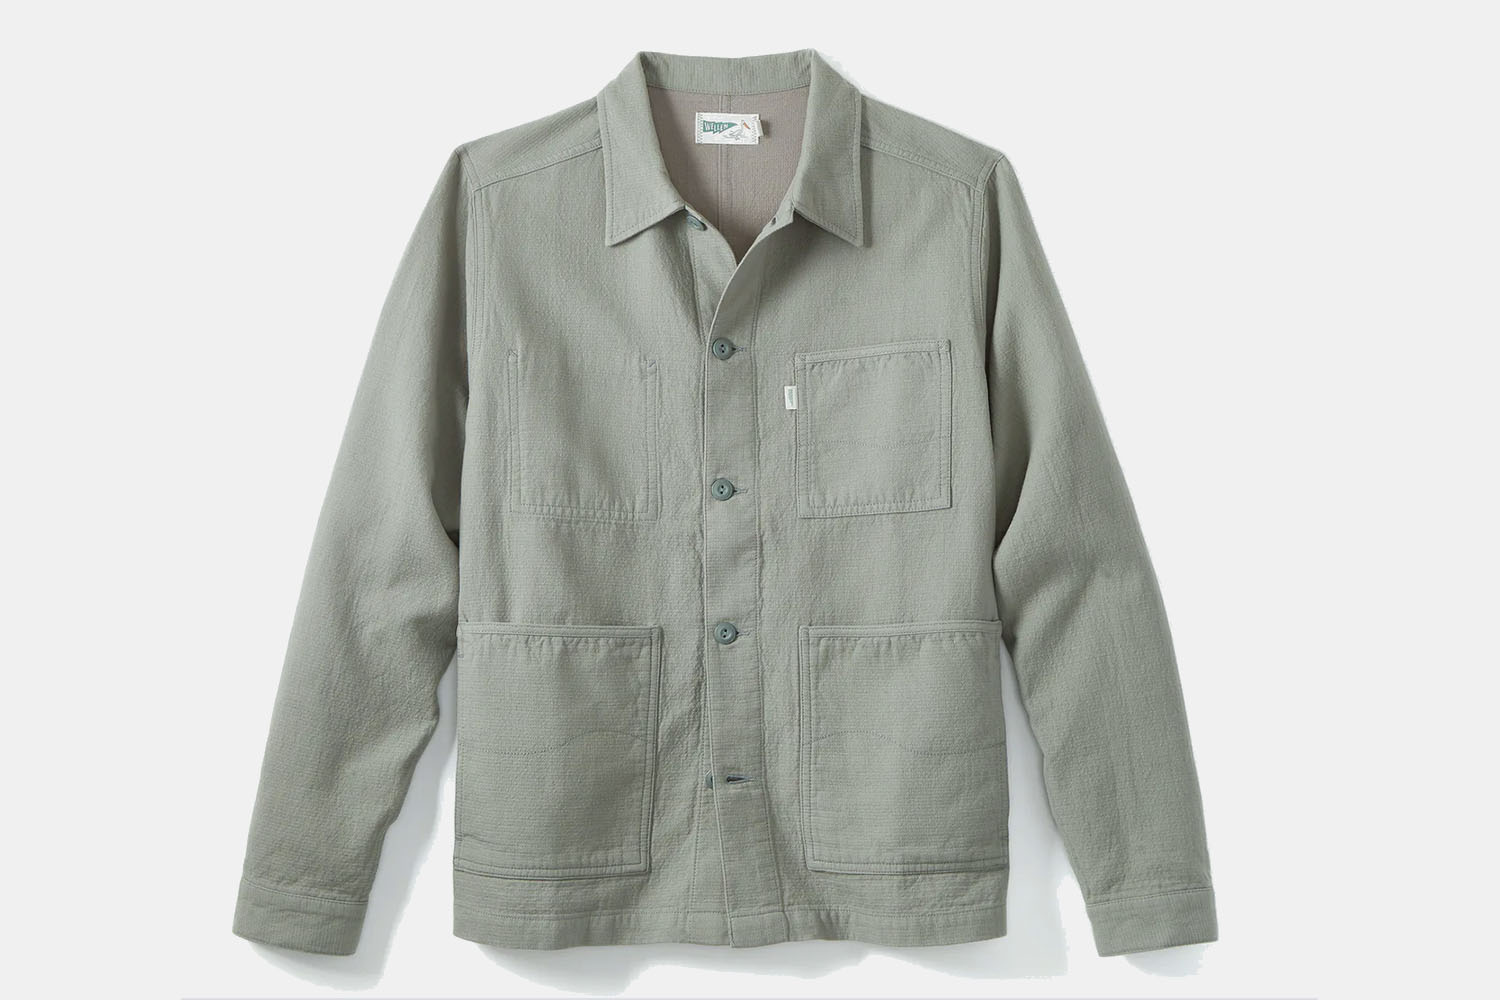 Deal: You Need a New Chore Jacket for Spring. Wellen’s Is Only $76.